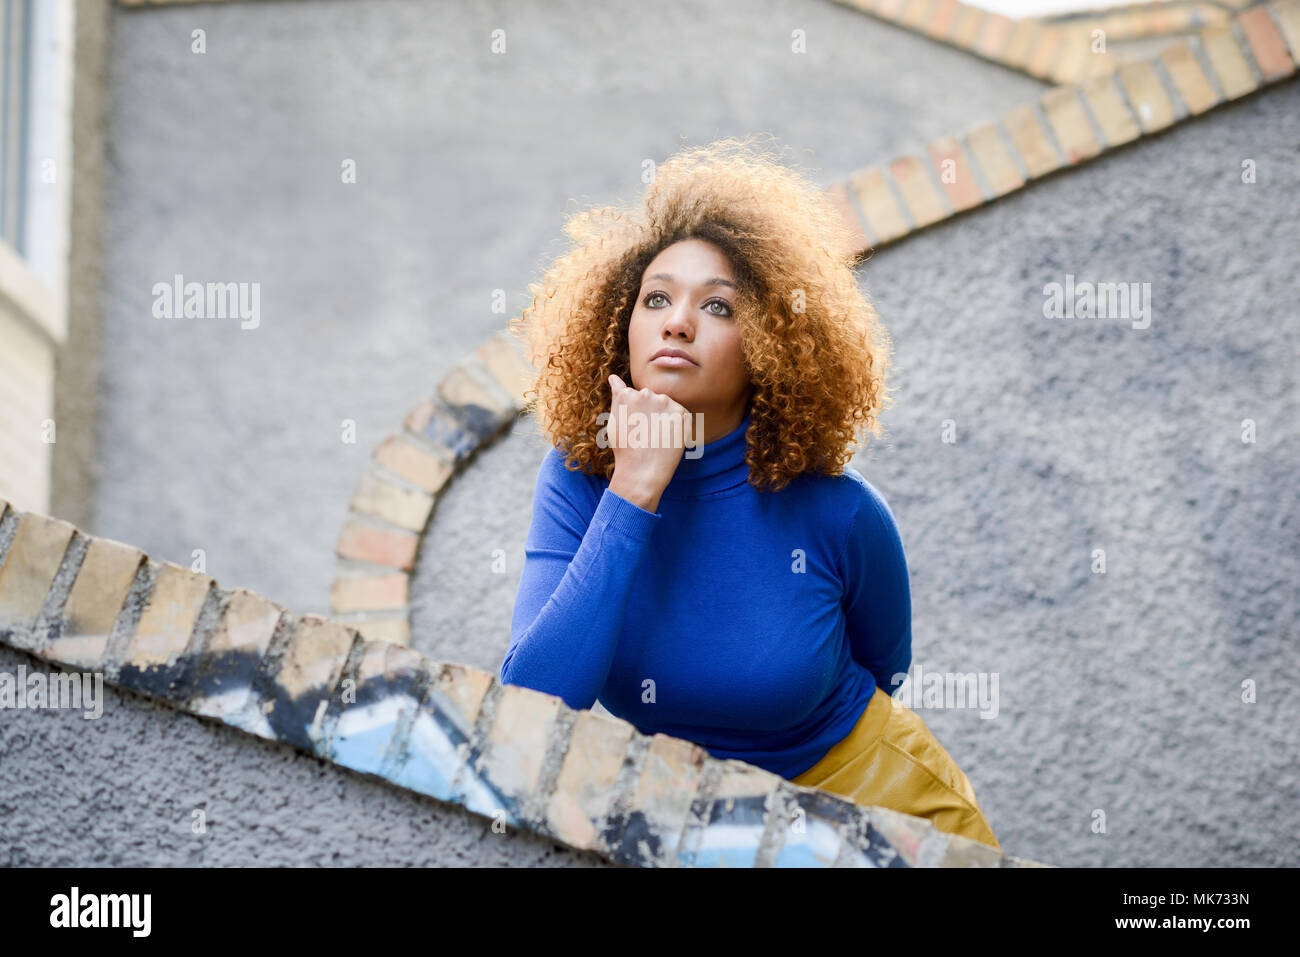 Beautiful young African American woman, model of fashion, with afro hairstyle and green eyes wearing blue sweater and yellow skirt in urban background Stock Photo